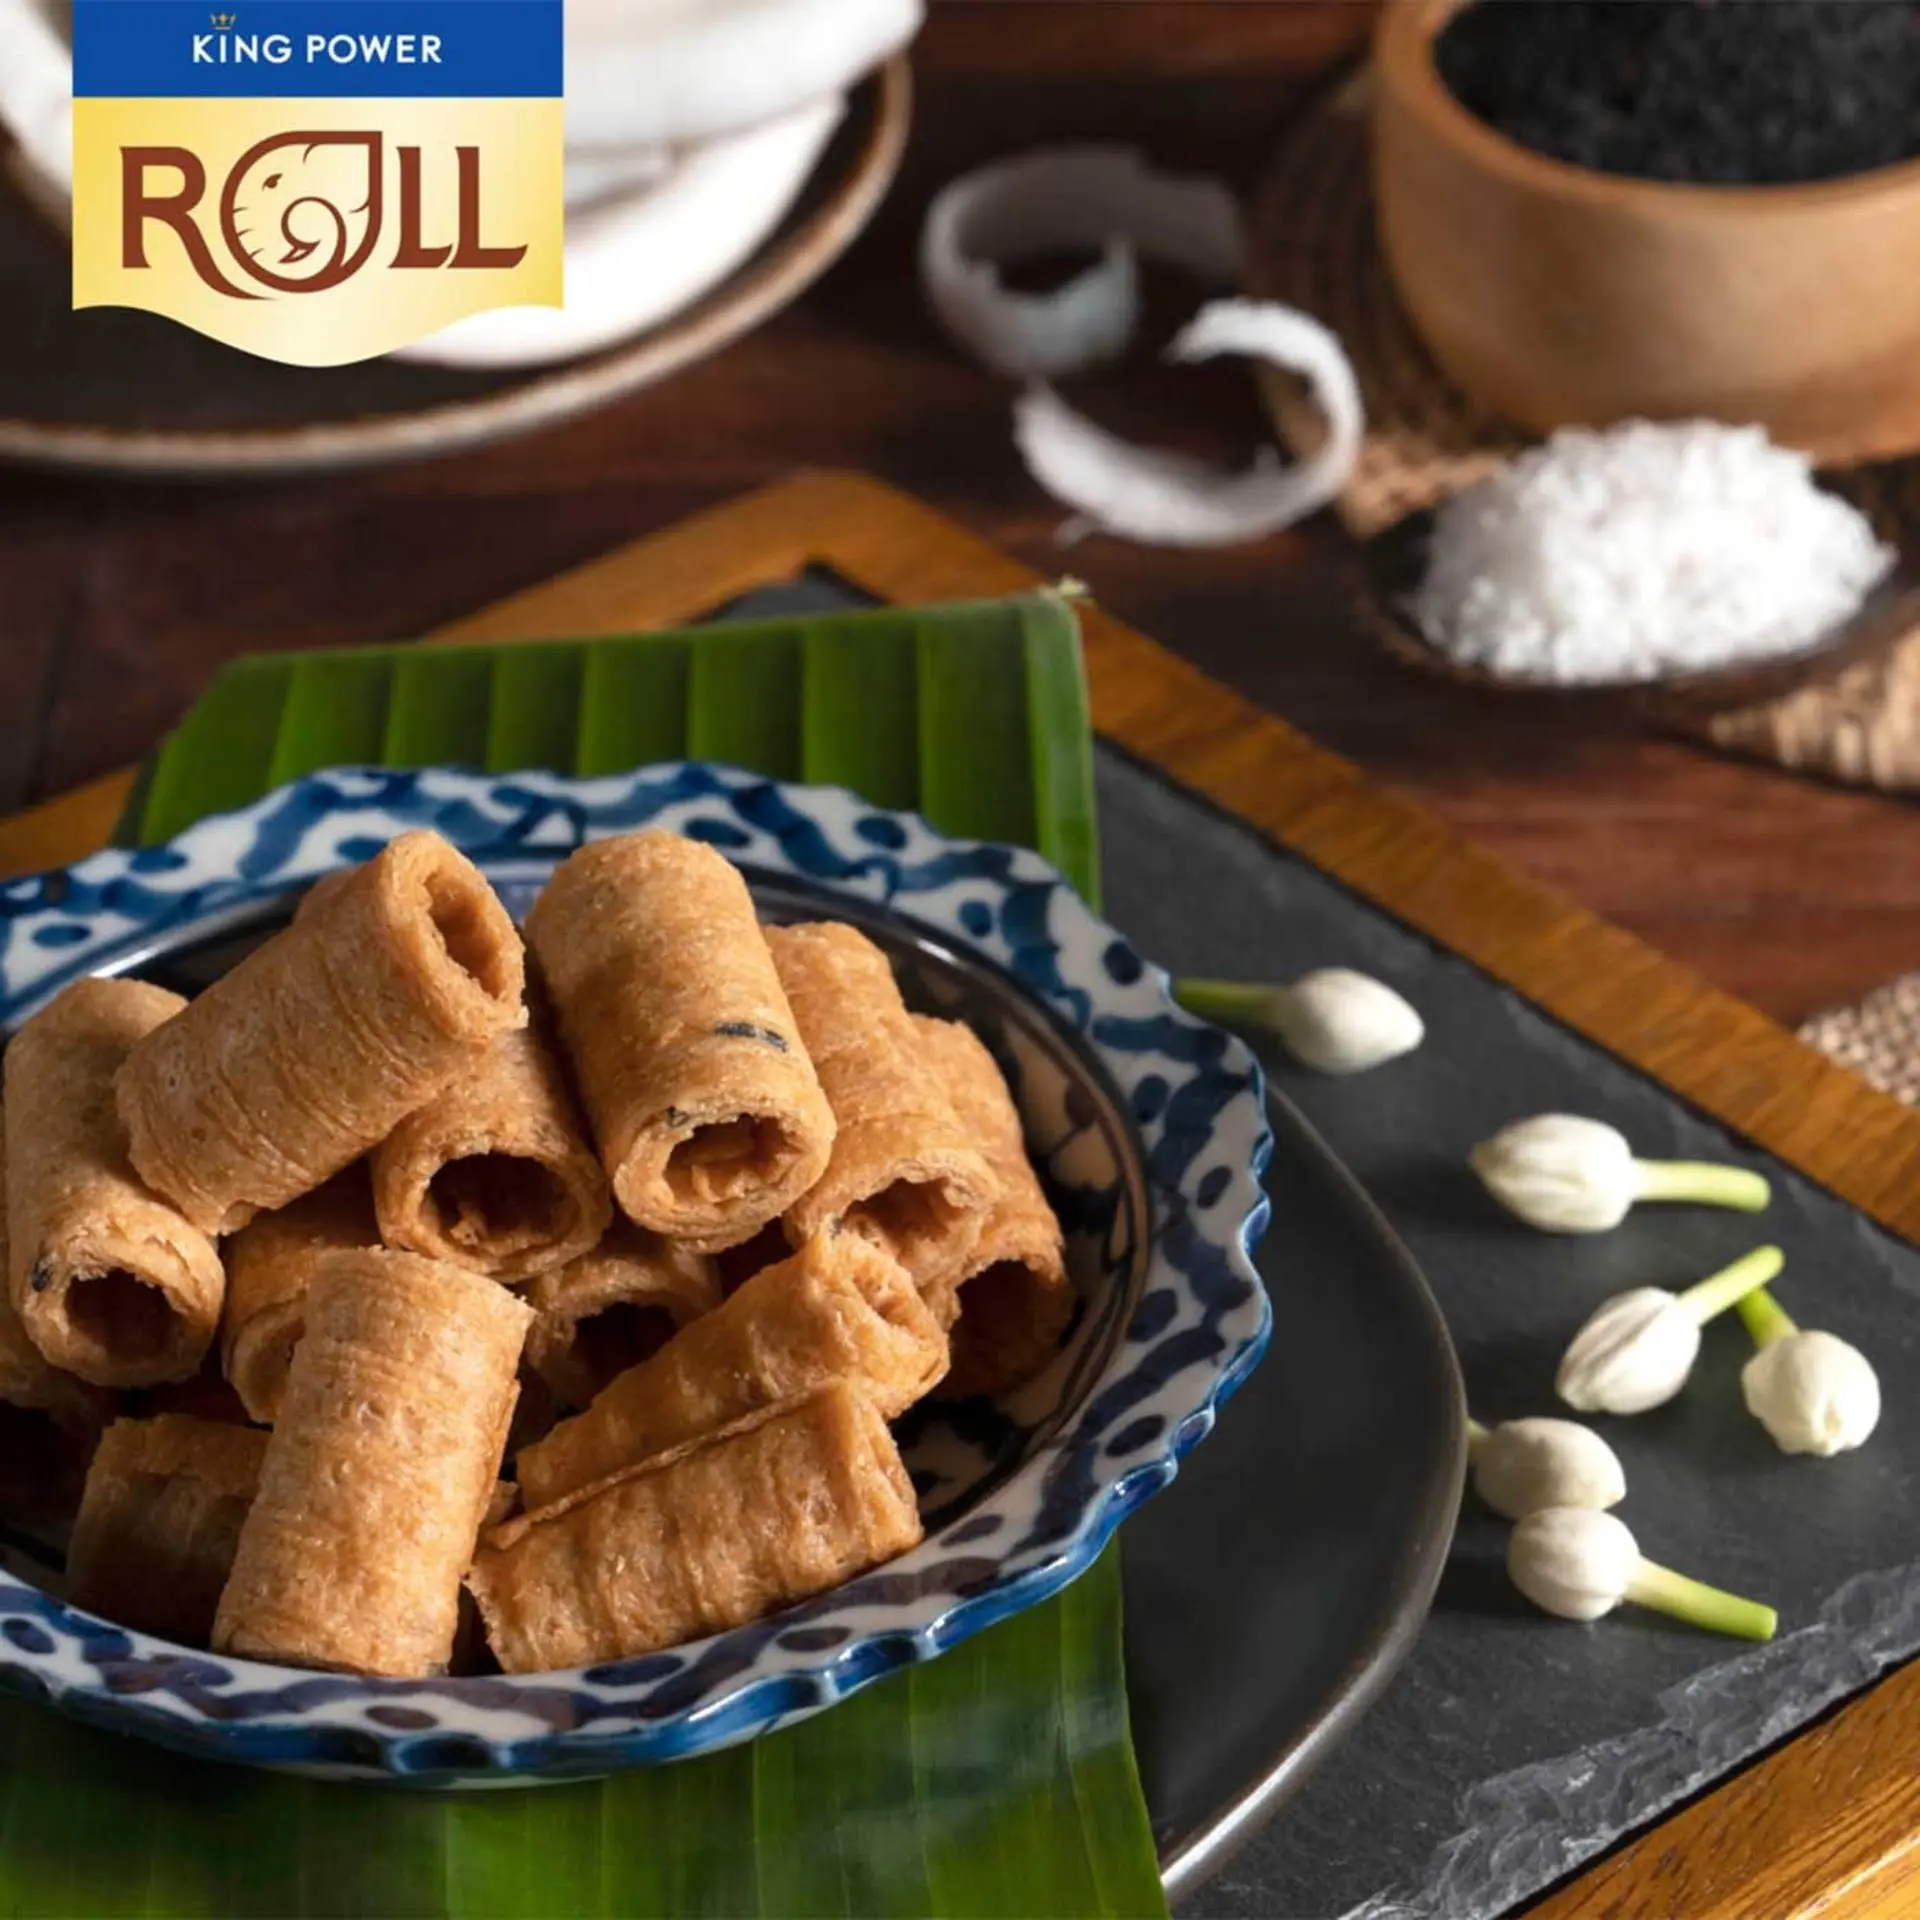 KING POWER ROLL Original - Sweet Coconut Crispy Rolls THAI SNACK FOR EVERYONE TO ENJOY WITH DELICIOUS TASTE